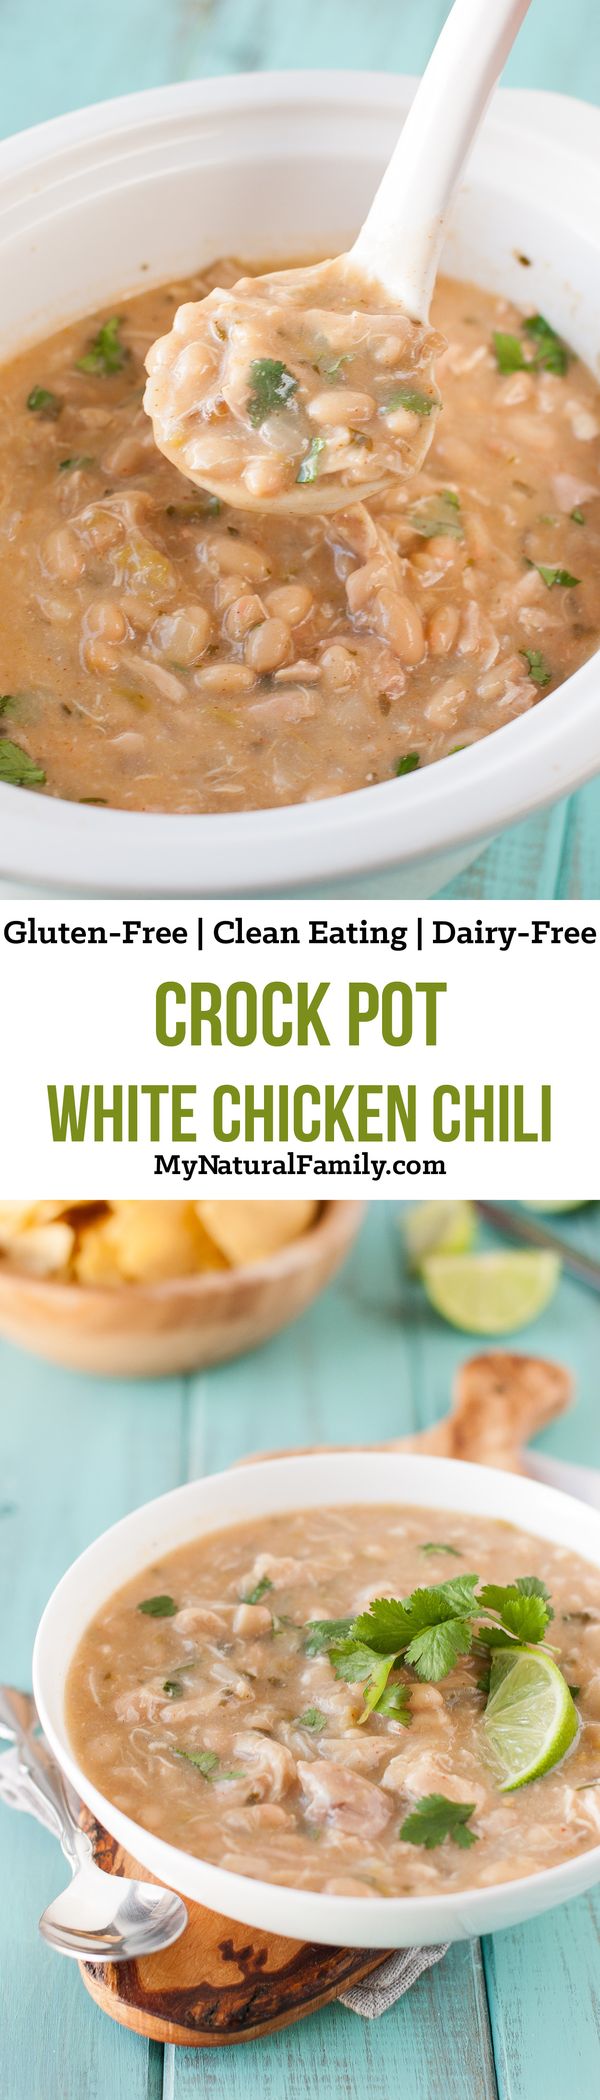 Slow Cooker Clean Eating White Chicken Chili